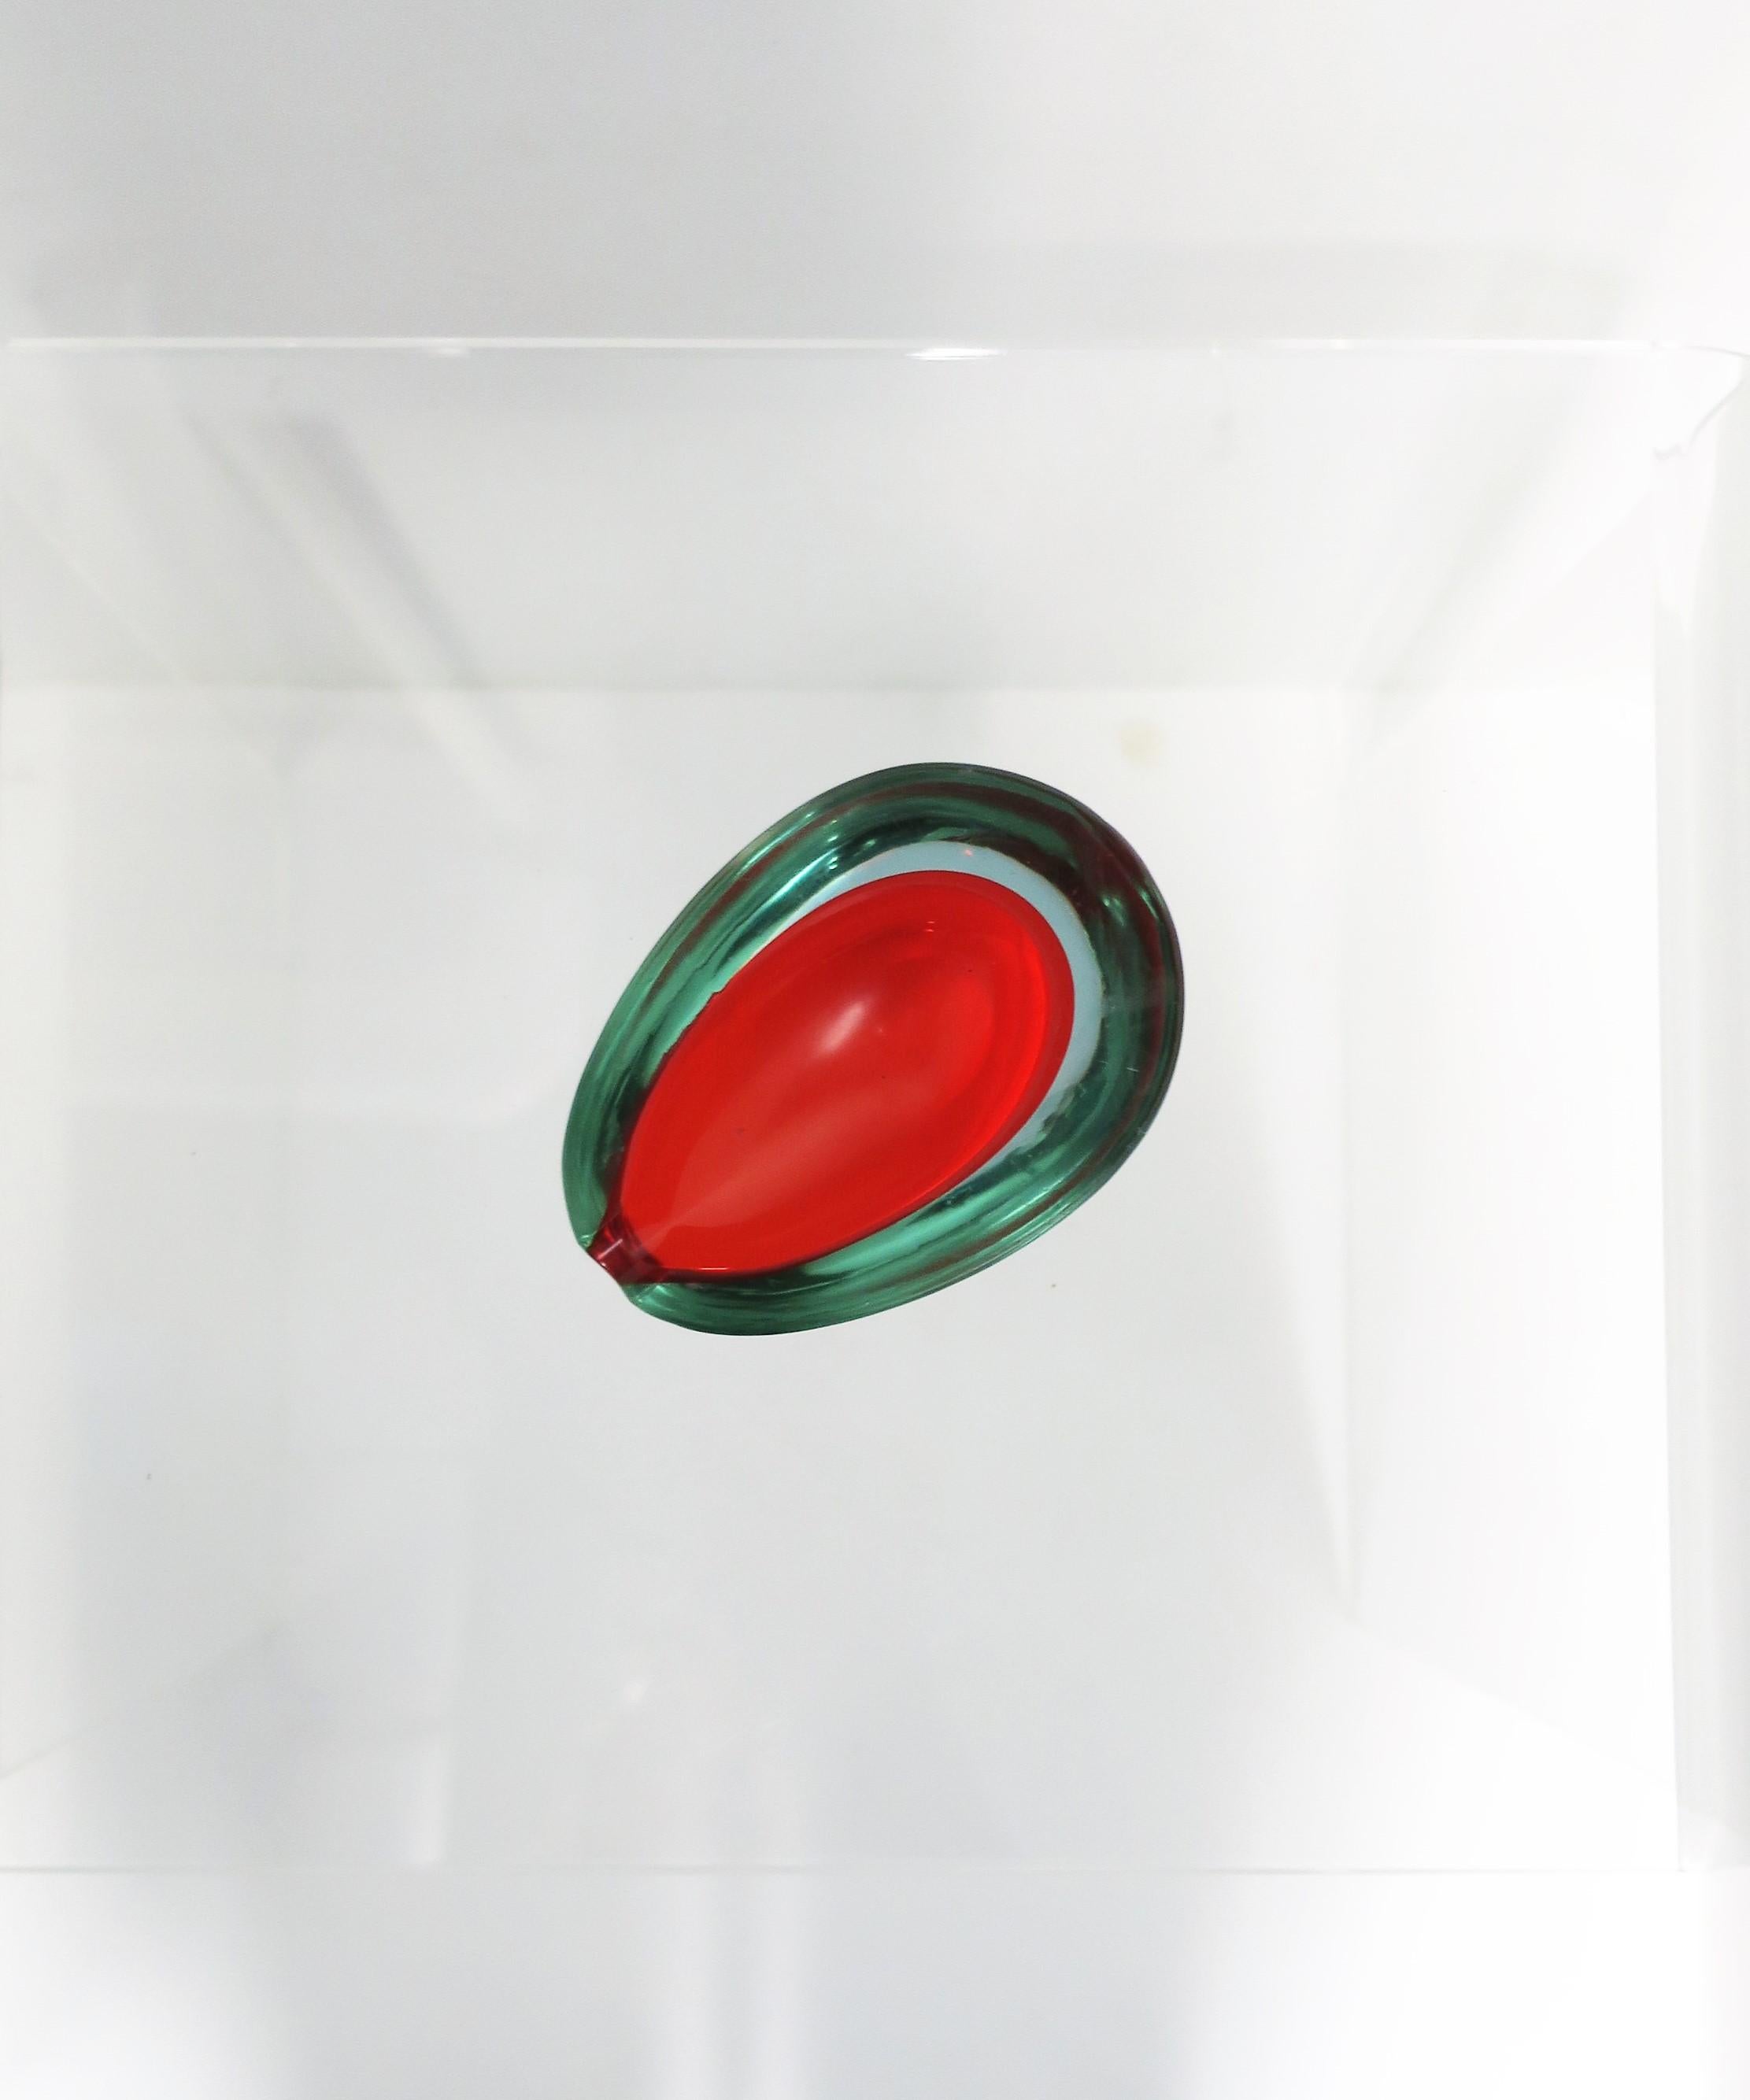 A Mid-Century Modern red Murano art glass ashtray or small vide-poche catchall, circa mid-20th century, Italy. Dimensions: 1.5